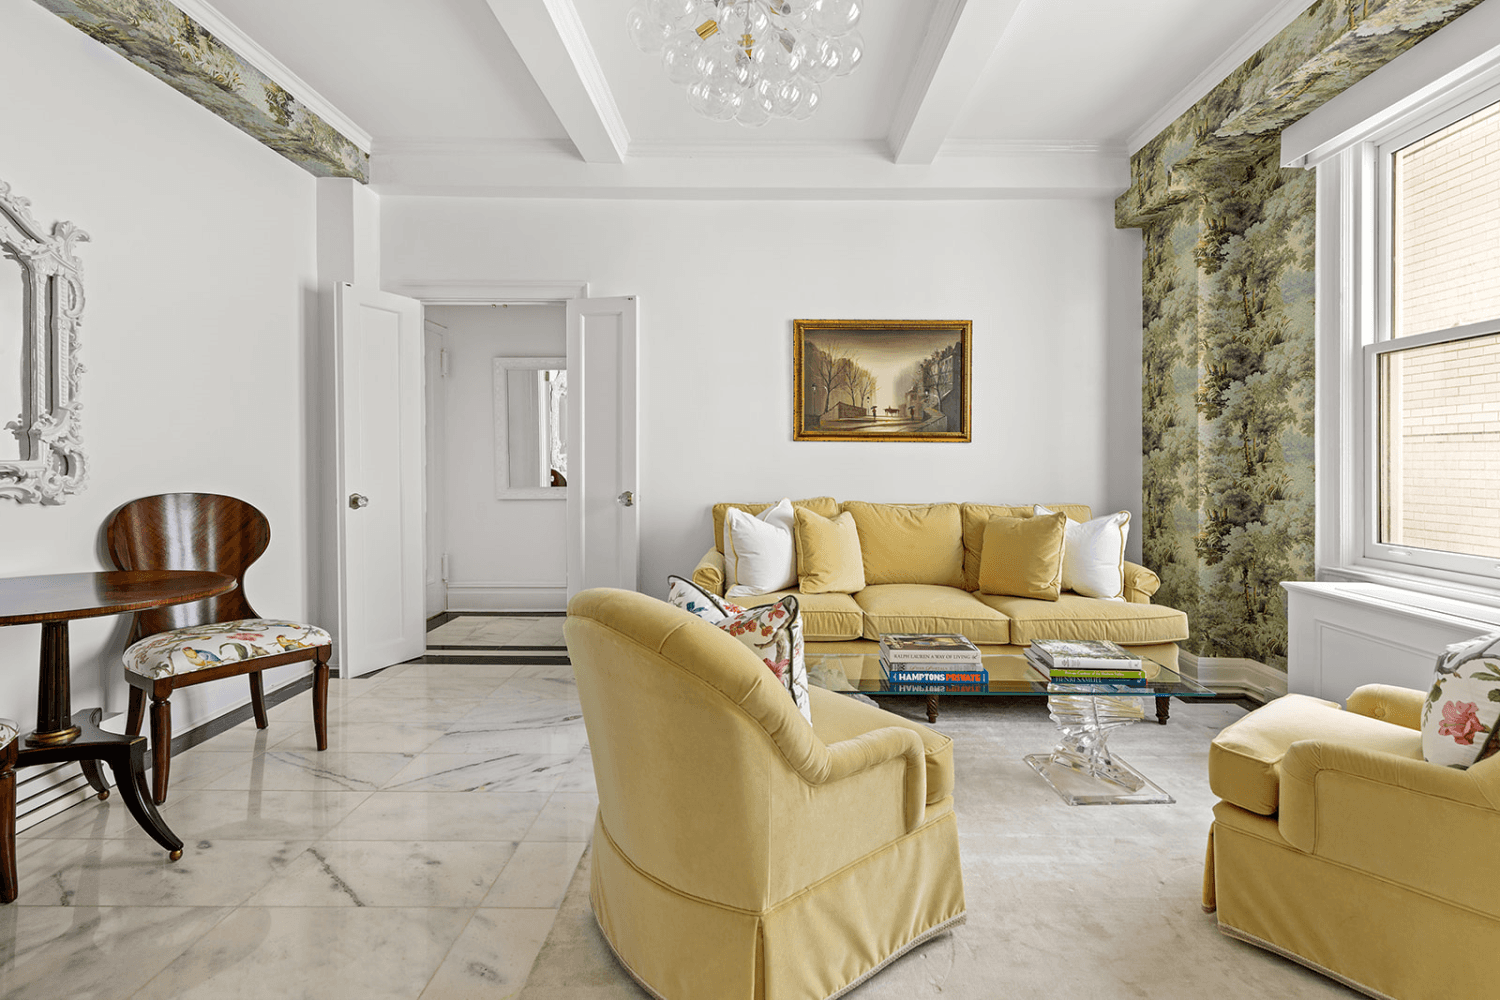 Enjoy Park Avenue living at its finest in this impeccably designed one bedroom, where the gorgeous prewar details blend seamlessly with the modern style of the apartment.